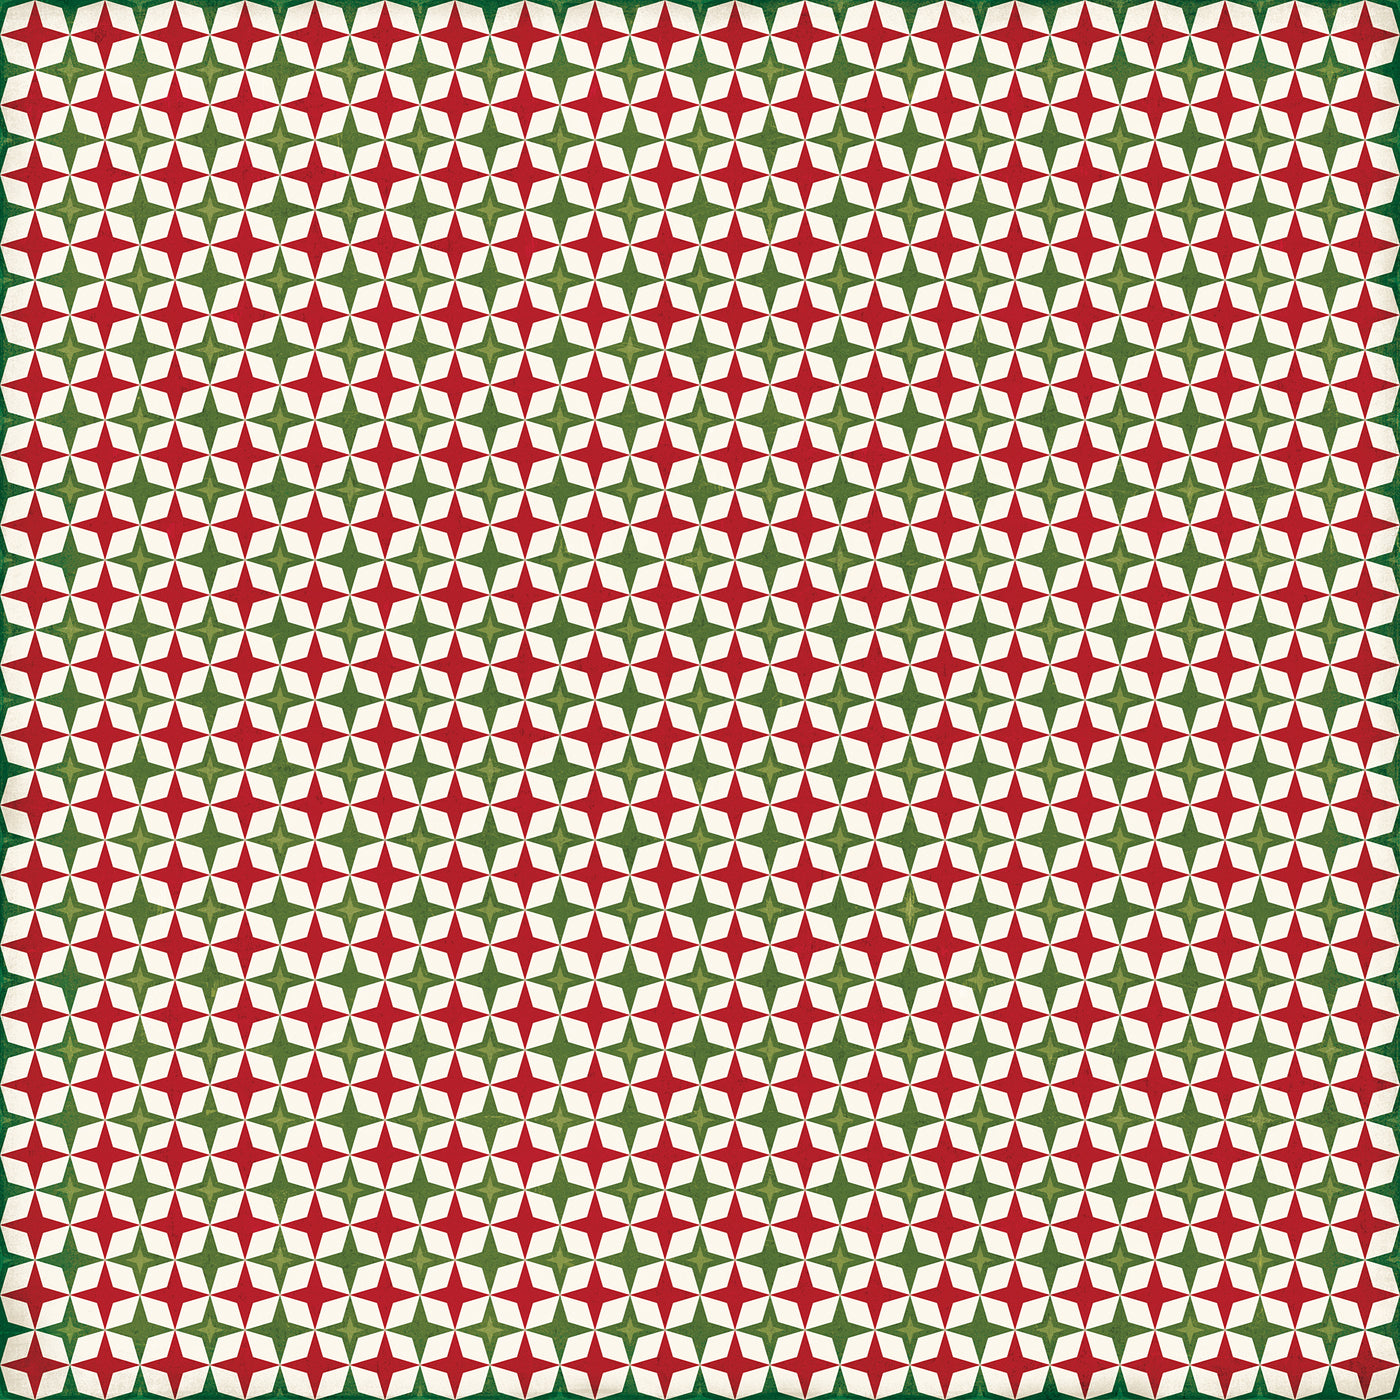 Side B - red, green, and off-white, geometric diamond pattern